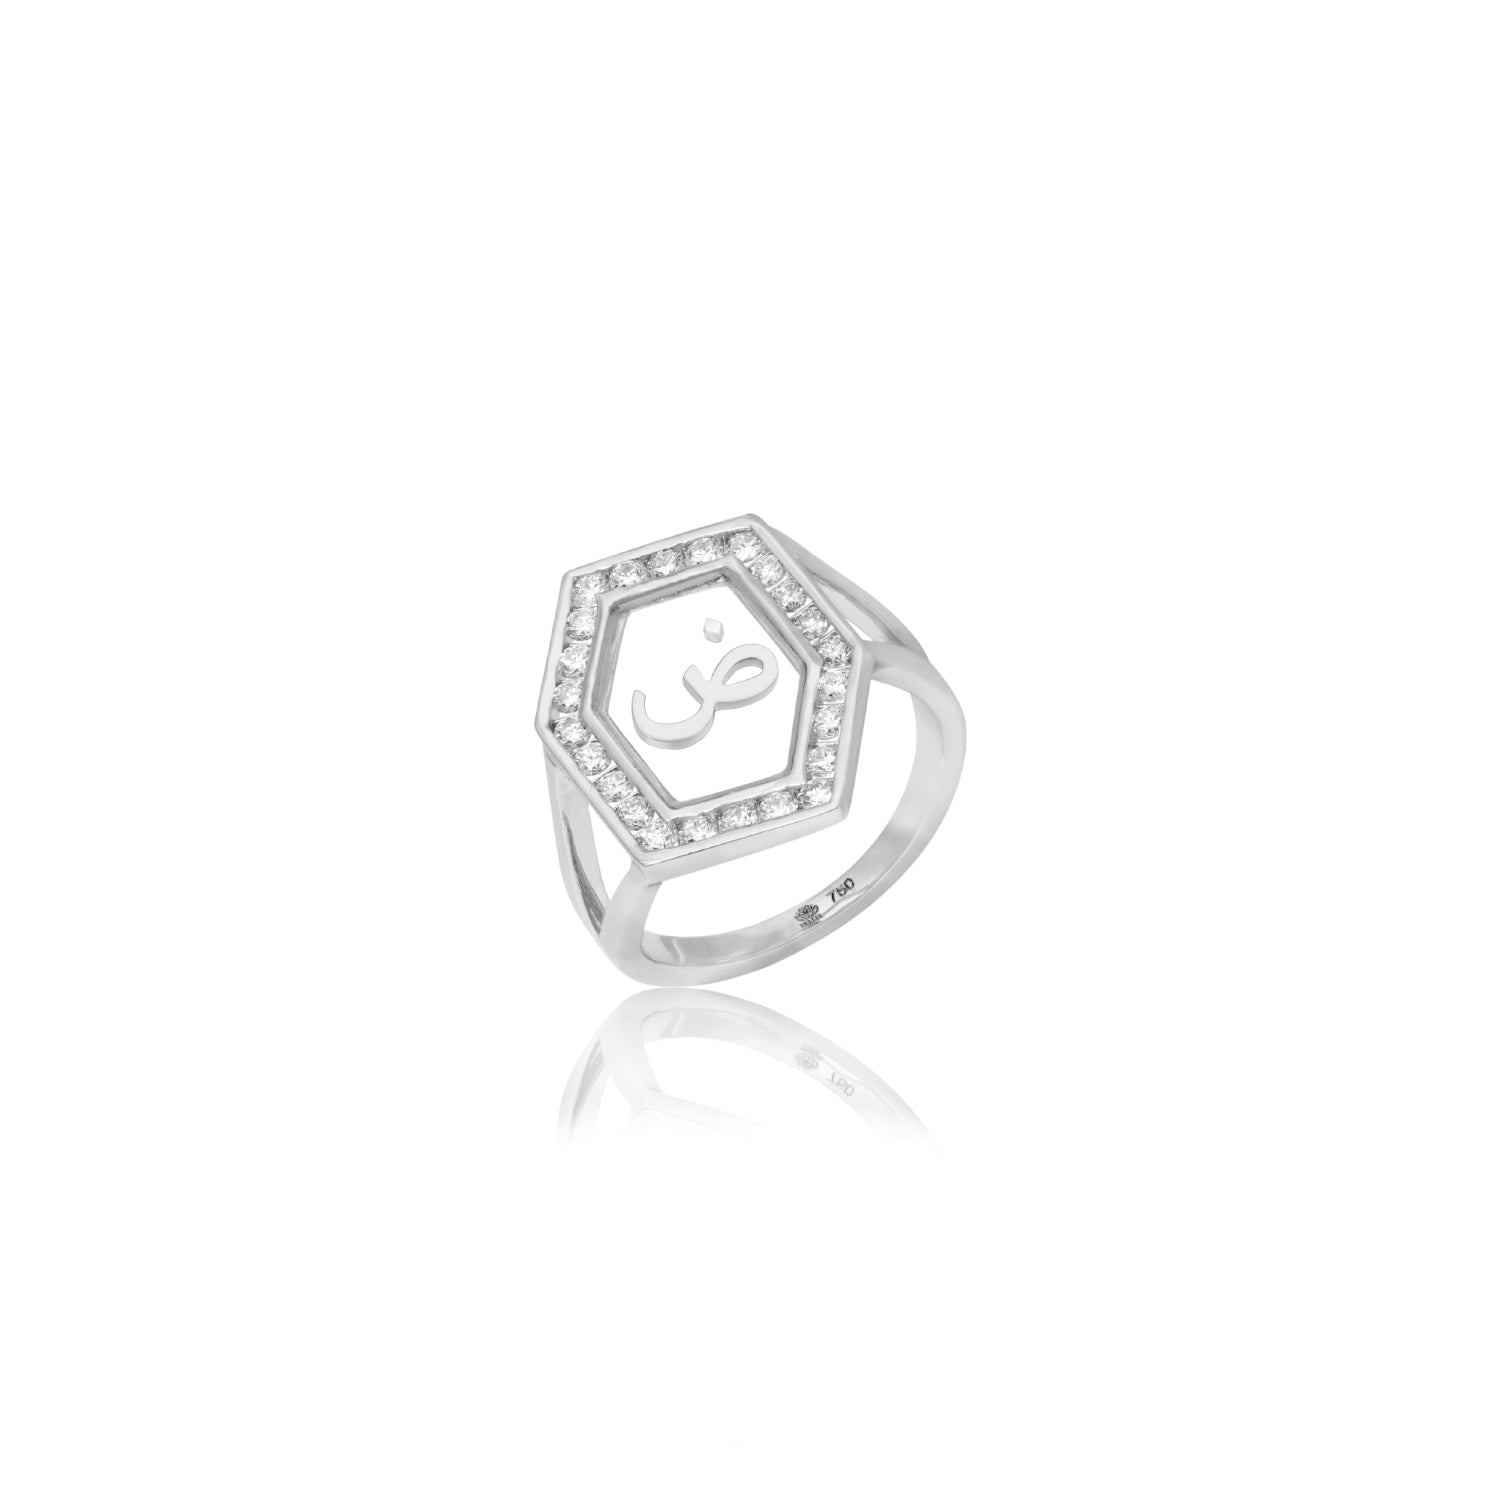 Qamoos 1.0 Letter ض Diamond Ring in White Gold